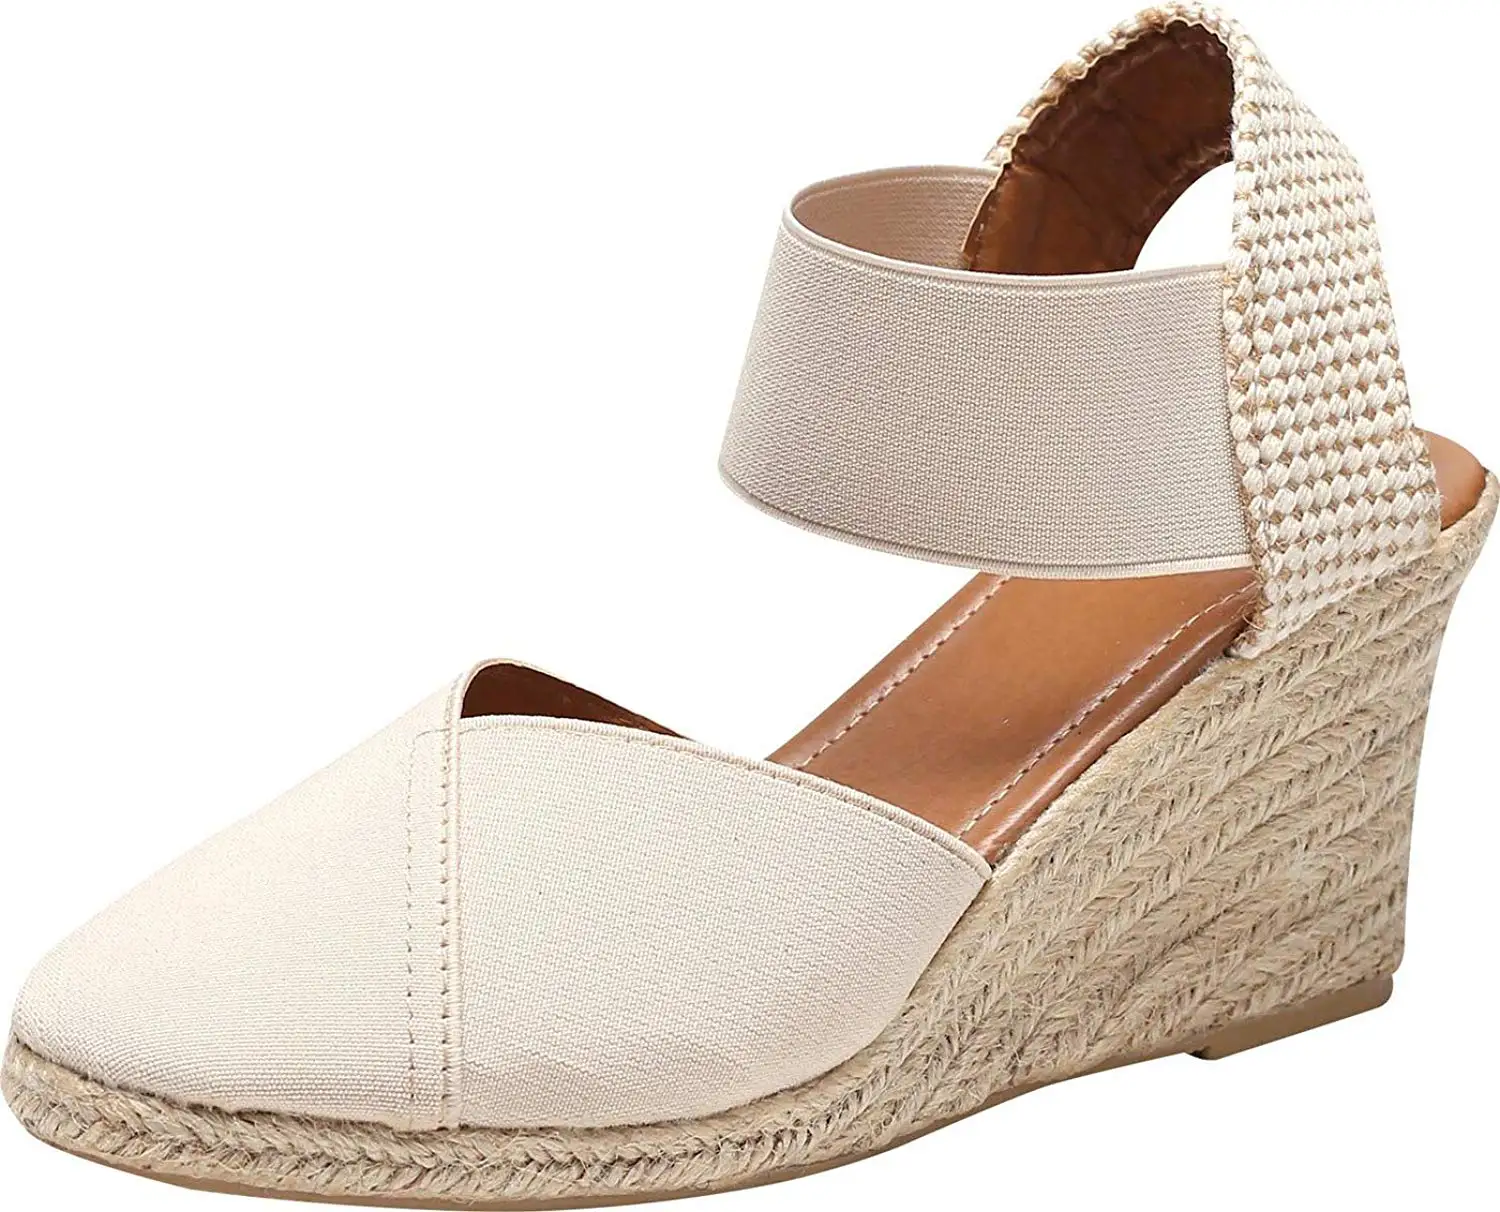 white wedge shoes closed toe